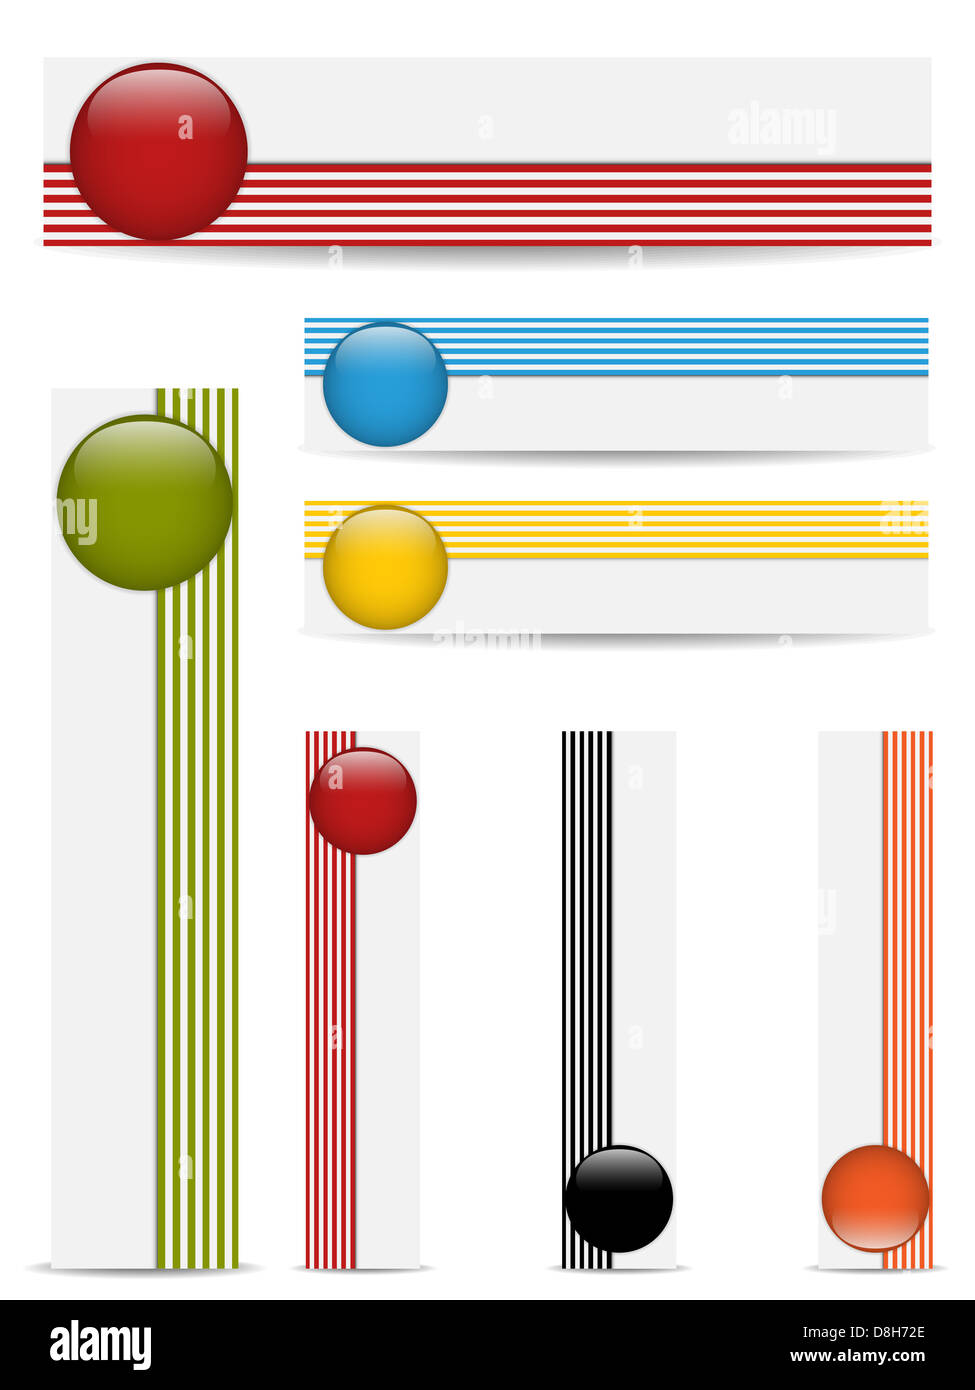 Glossy web buttons with colored bars. Editable Vector Illustration Stock Photo